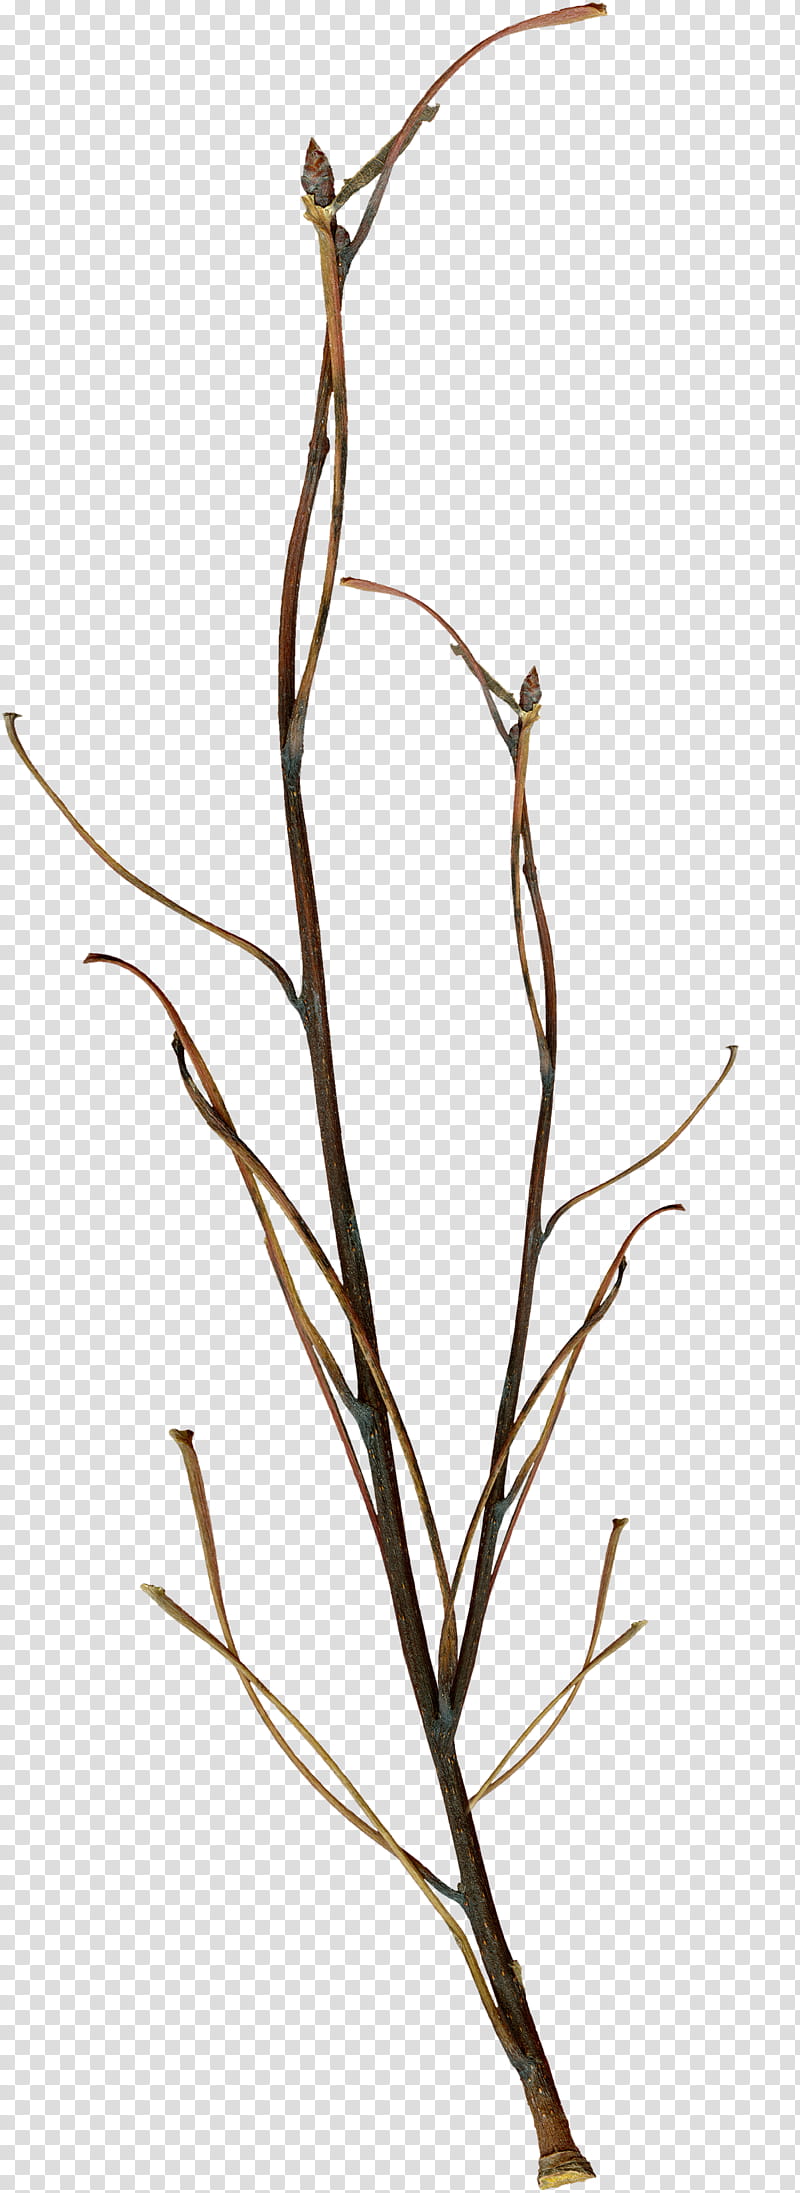 Twig, brown twig transparent background PNG clipart